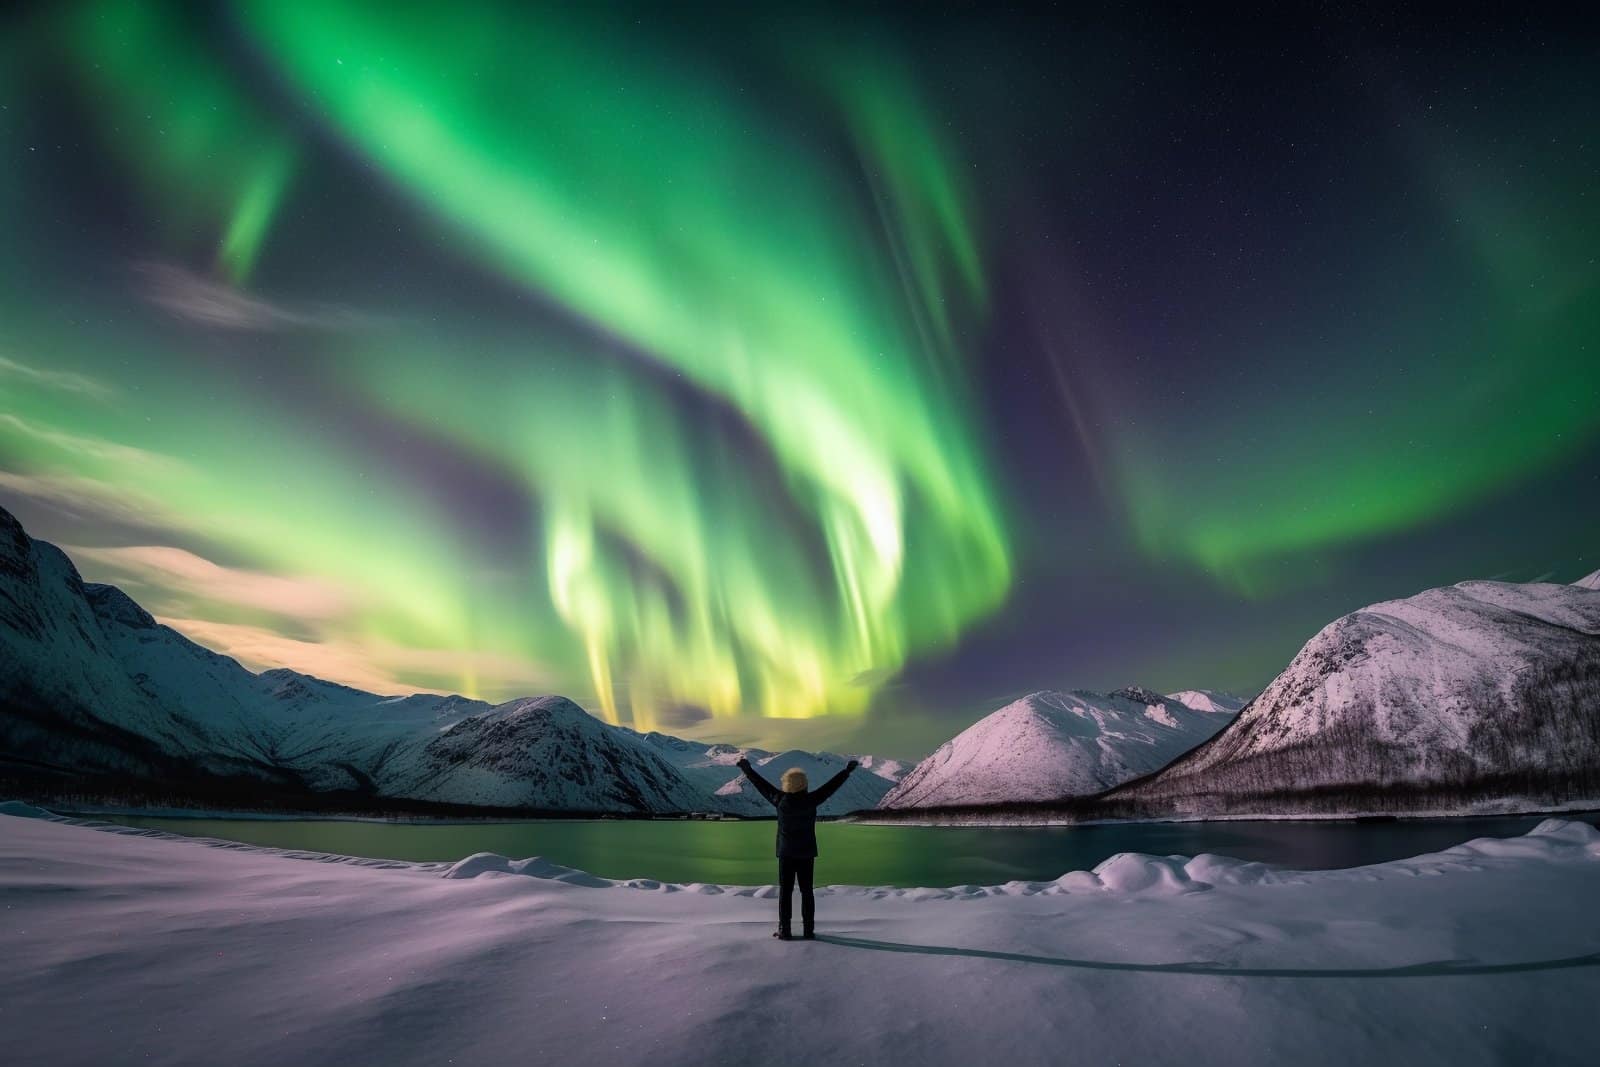 <p class="wp-caption-text">Image Credit: Shutterstock / Jose Manuel Perez</p>  <p><span>Witnessing the Northern Lights, or Aurora Borealis, in Iceland is a mesmerizing experience that draws travelers from around the world. The dance of colors across the night sky, from vivid greens to purples and pinks, is a natural phenomenon that captures the imagination and wonder of all who see it. Iceland’s dramatic landscapes of volcanoes, glaciers, and hot springs provide the perfect backdrop for this celestial display. Beyond the Northern Lights, Iceland offers a wealth of adventures, from exploring the Golden Circle and bathing in the Blue Lagoon to hiking glaciers and witnessing the power of its waterfalls.</span></p>